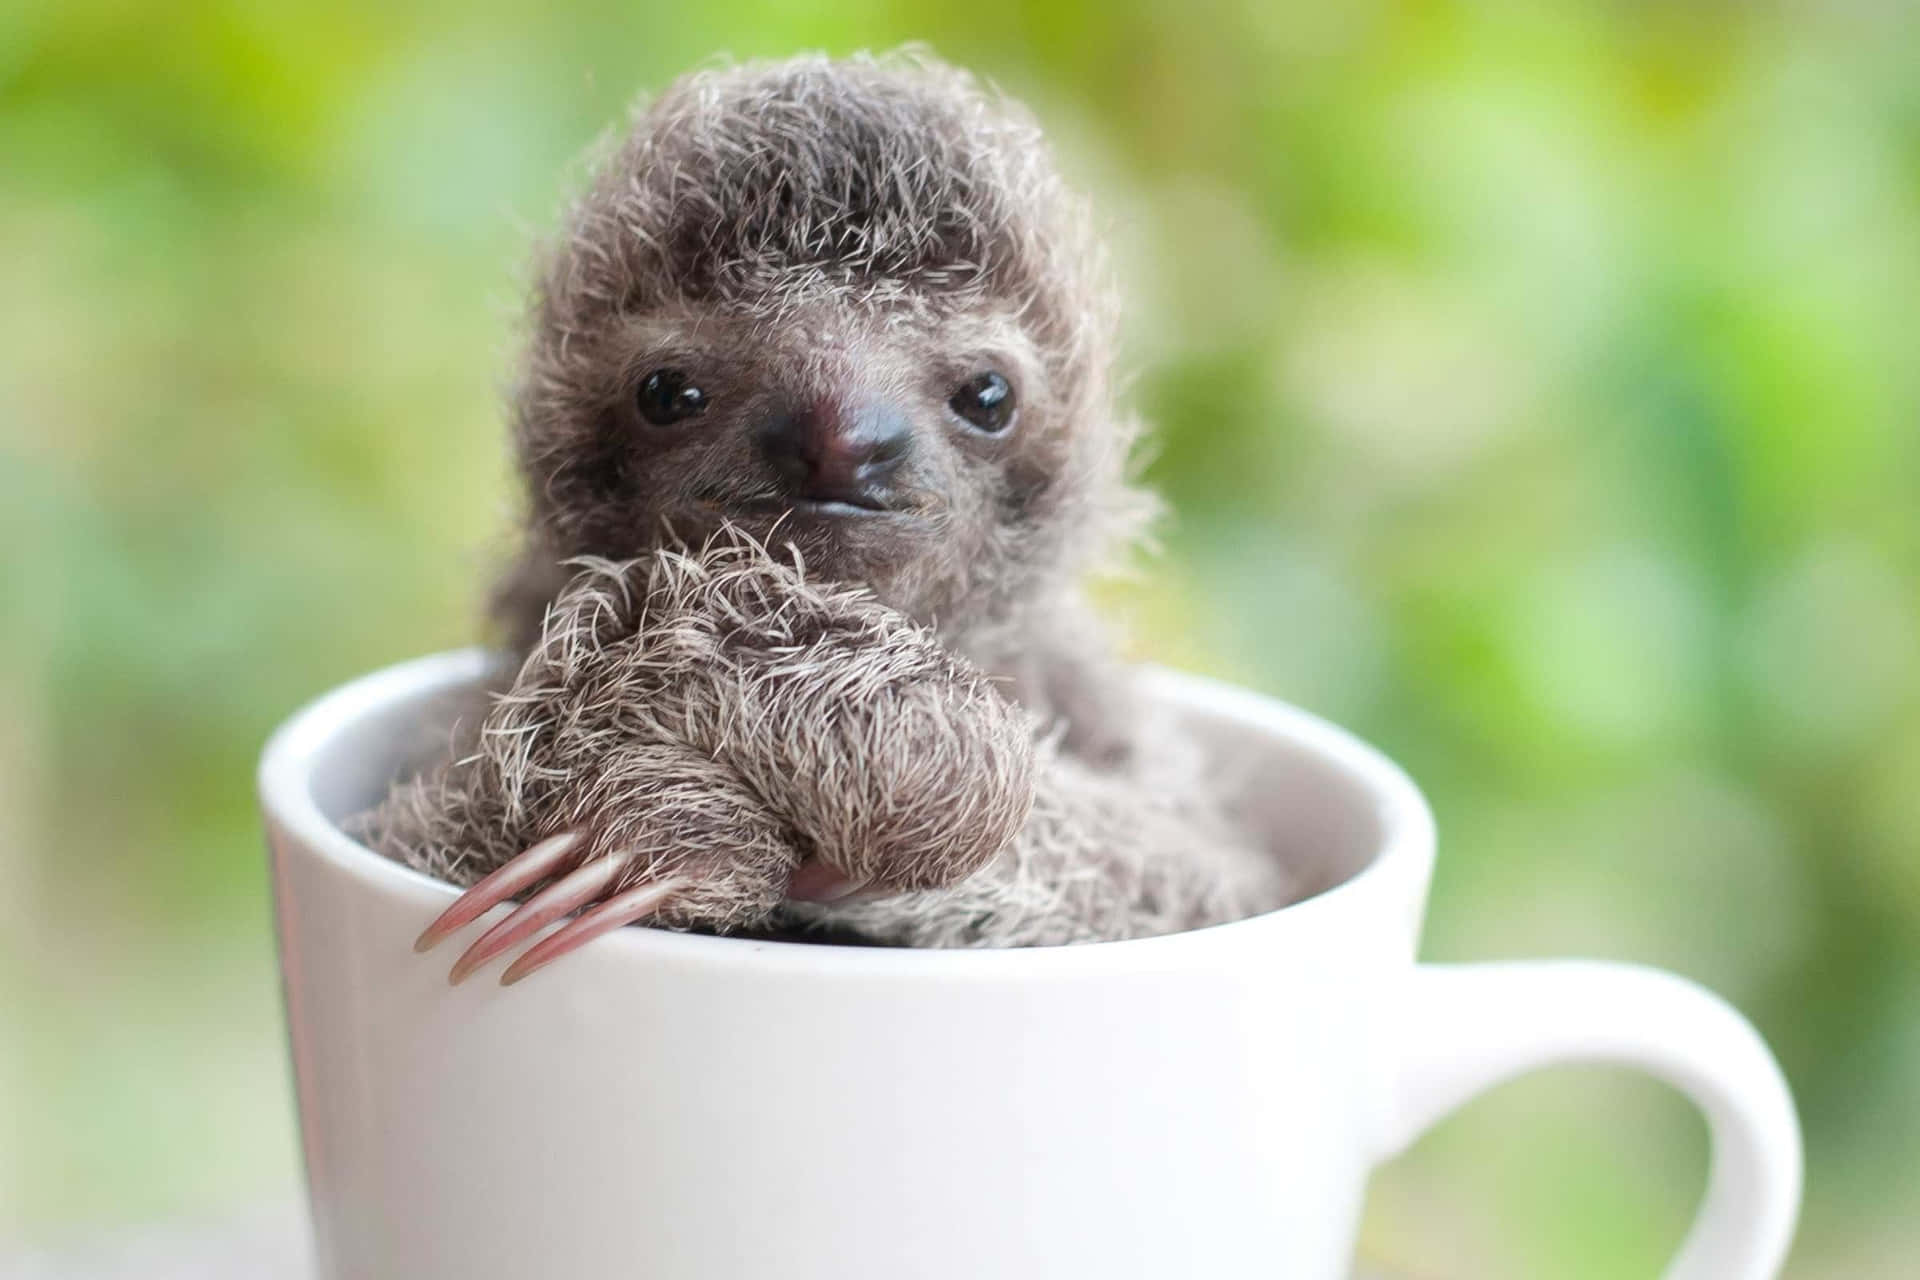 A Baby Sloth Sitting In A Coffee Cup